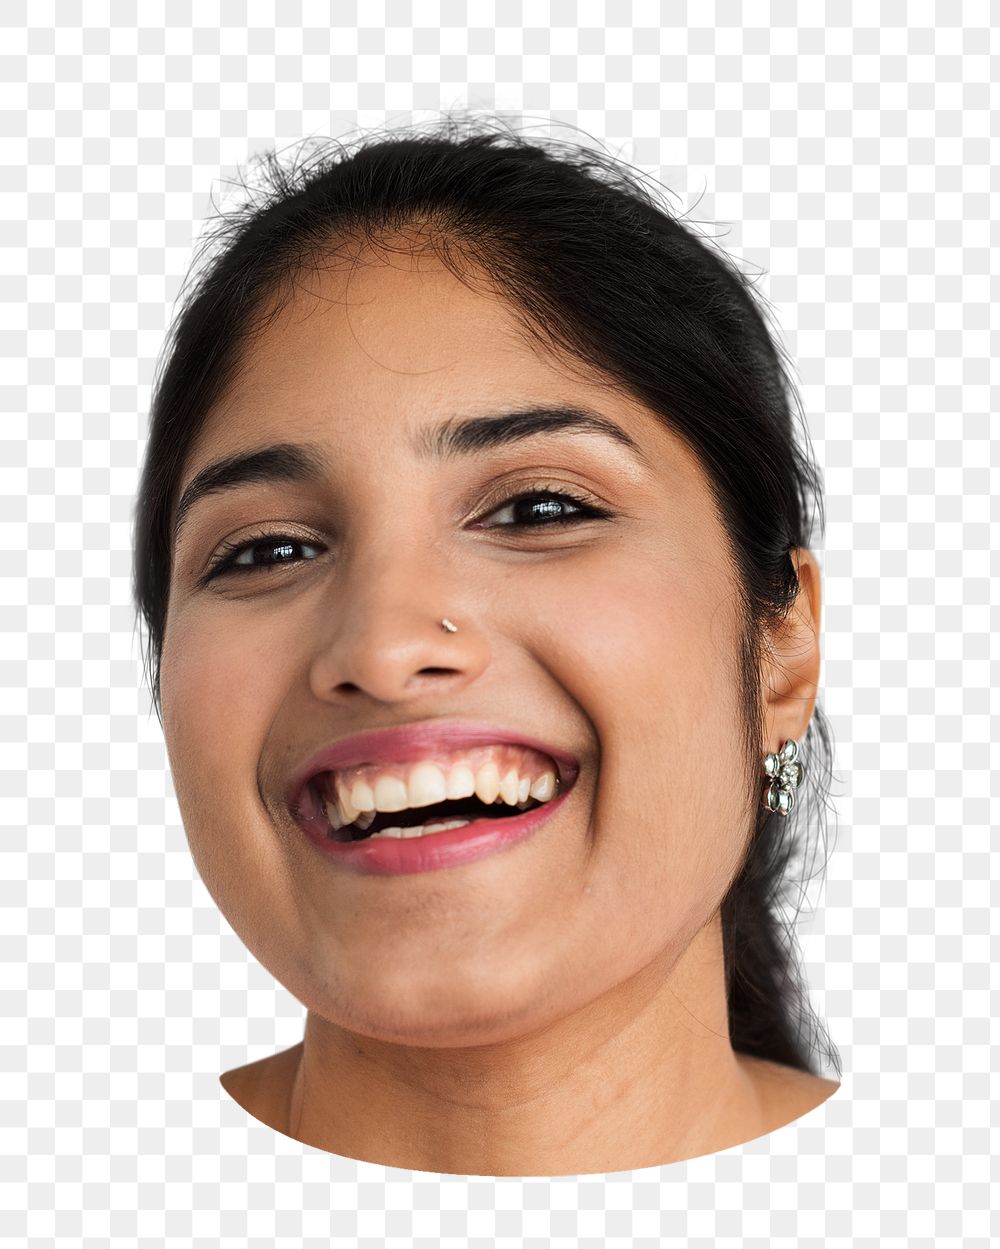 Indian woman png smiling portrait on transparent background